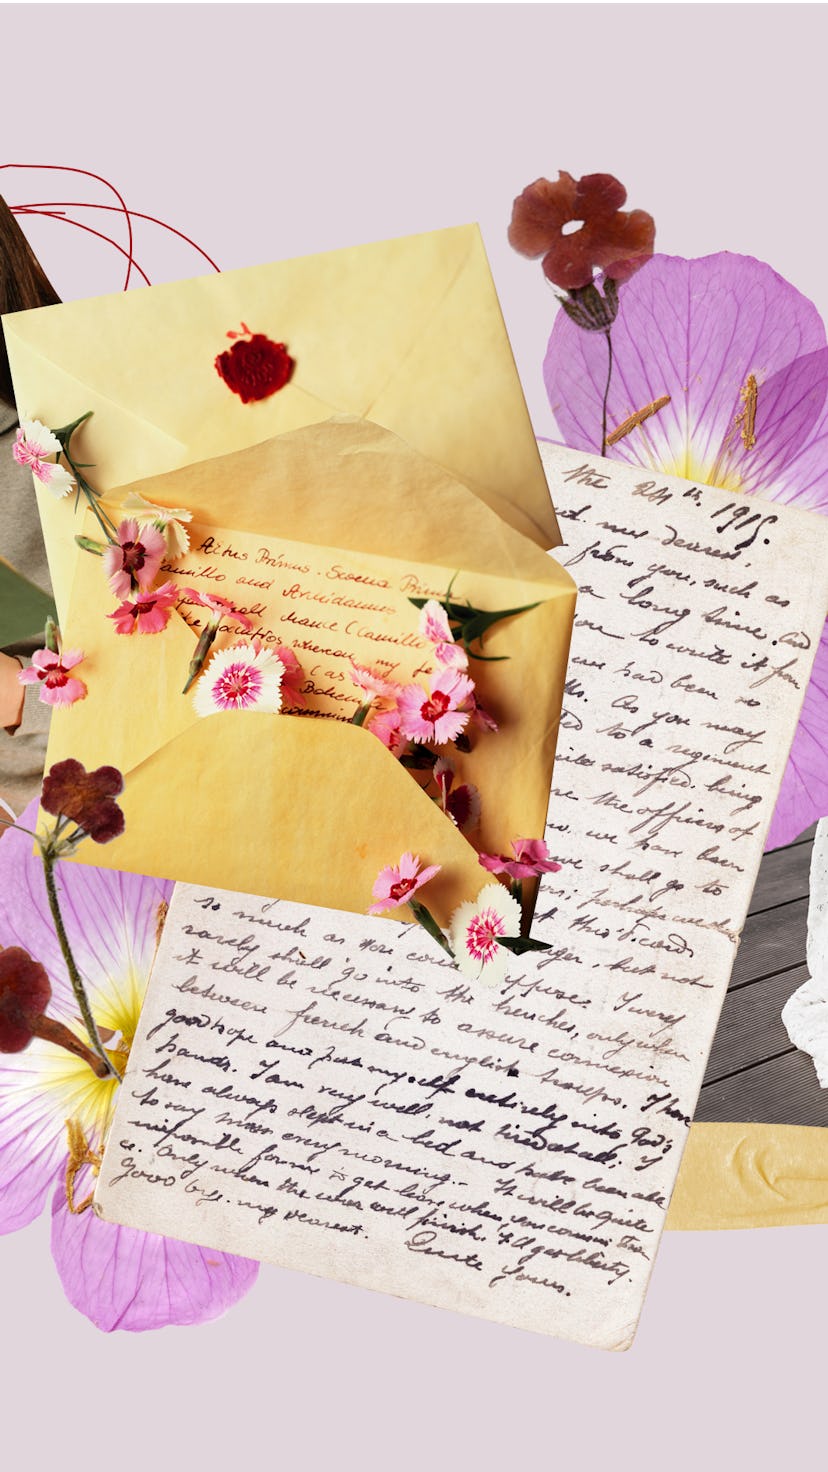 Romance novels, flowers, and love letters